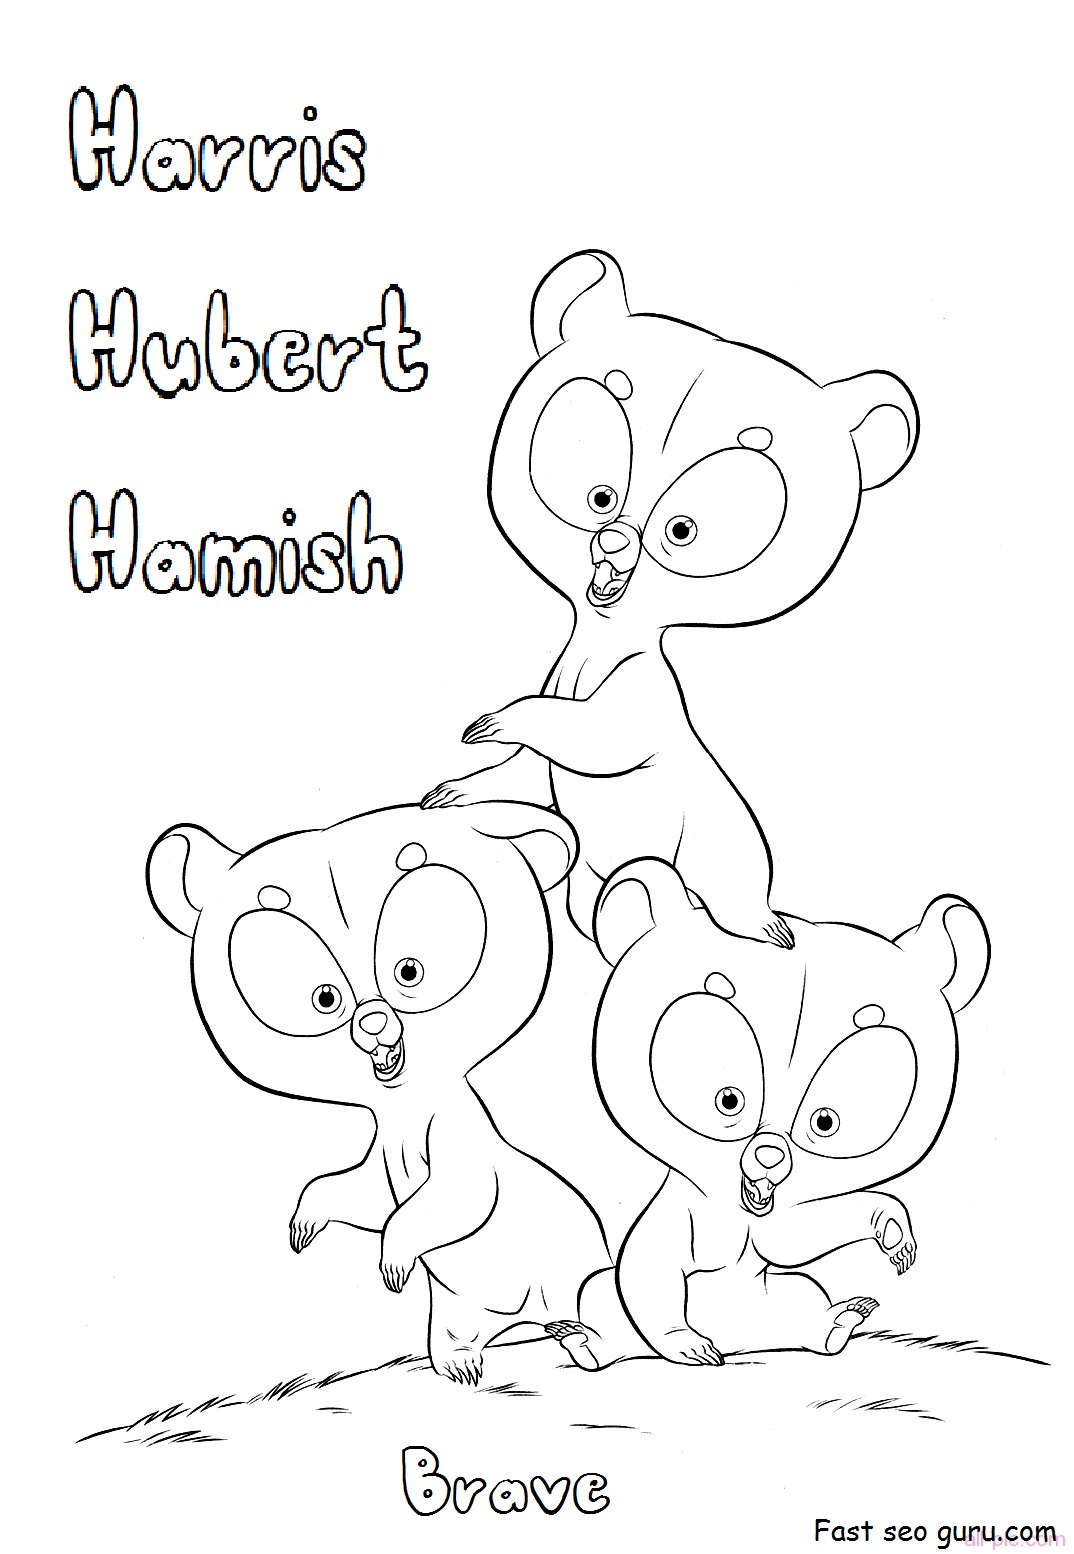 Printable Brave Harris Hubert and Hamish coloring pages